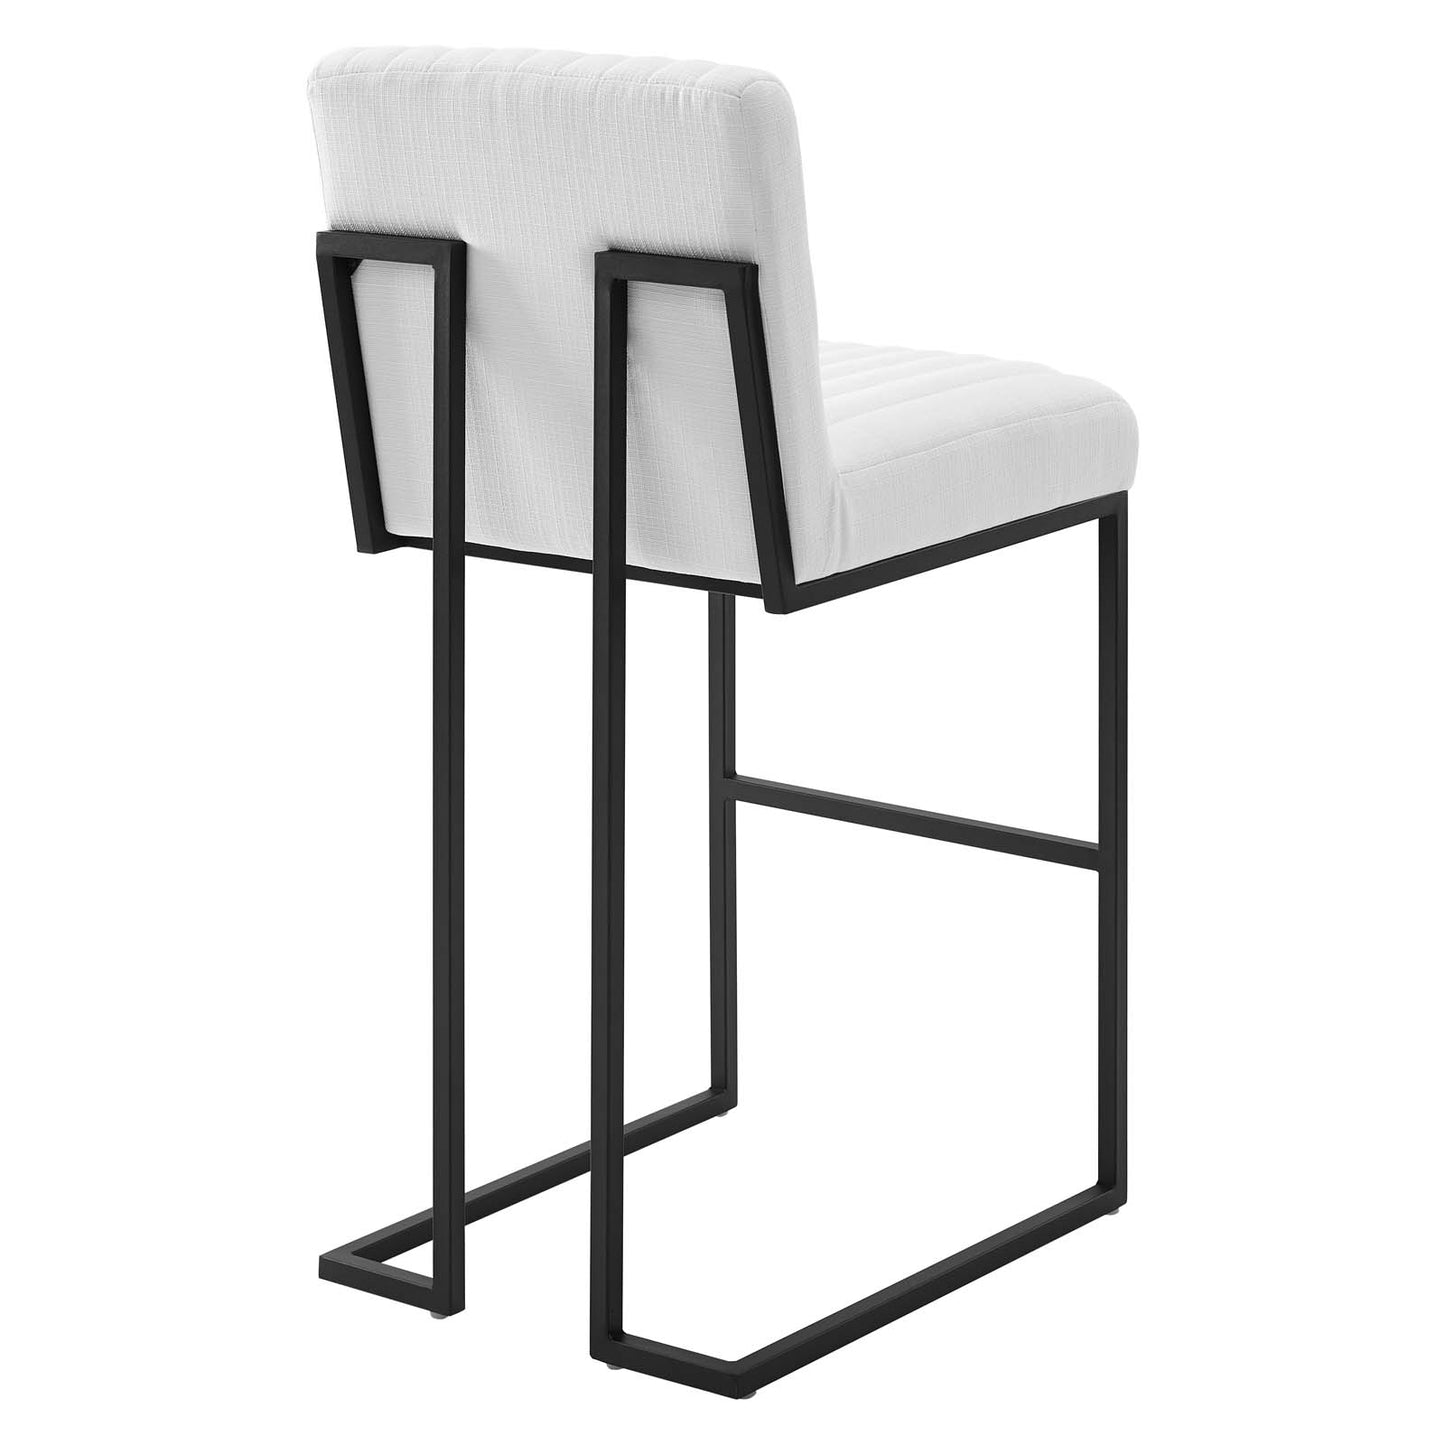 Indulge Channel Tufted Fabric Bar Stool White EEI-4654-WHI